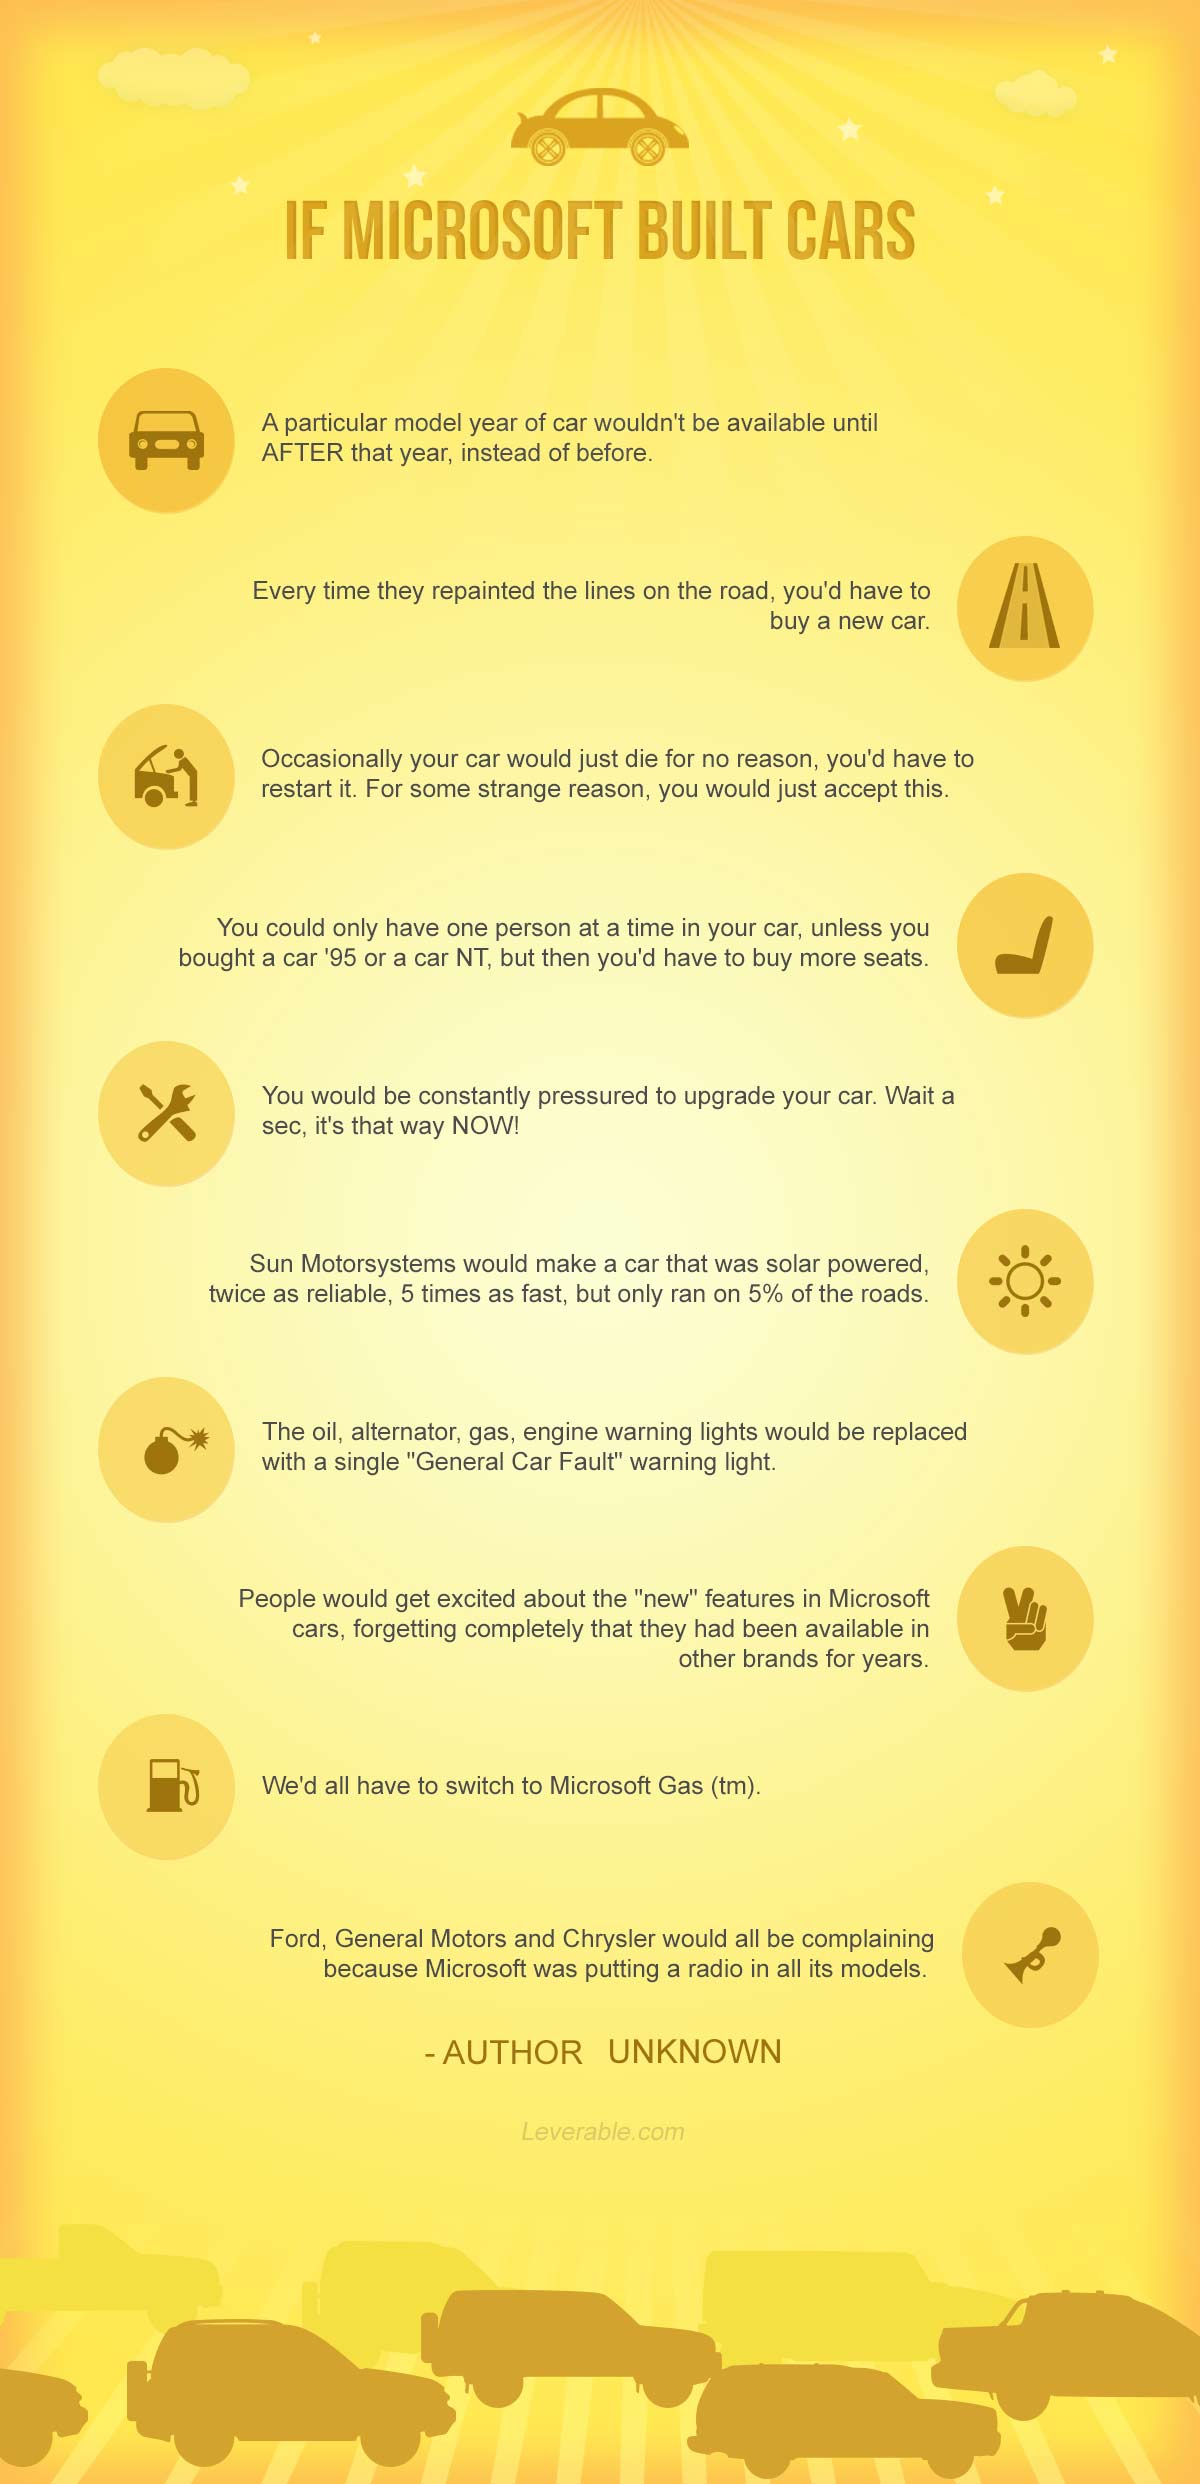 If Microsoft Built Cars Infographic